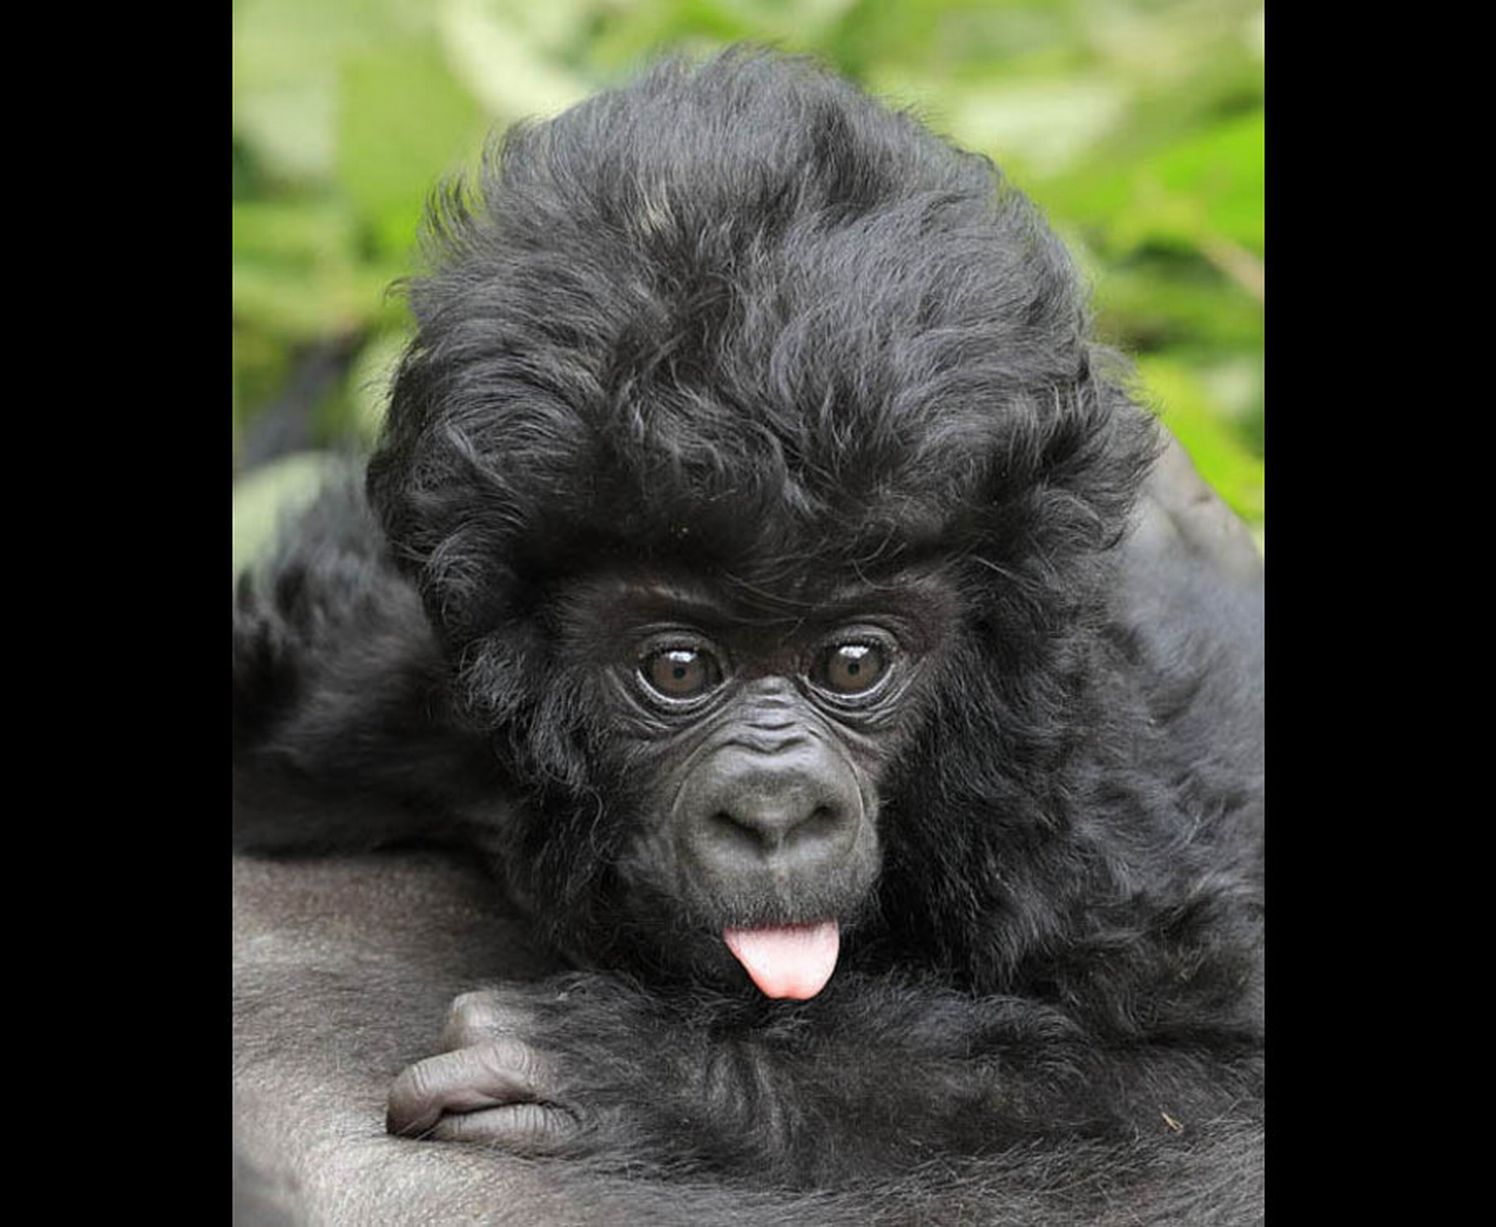 A cheeky baby gorilla shows off his luscious locks while sticking his tongue out